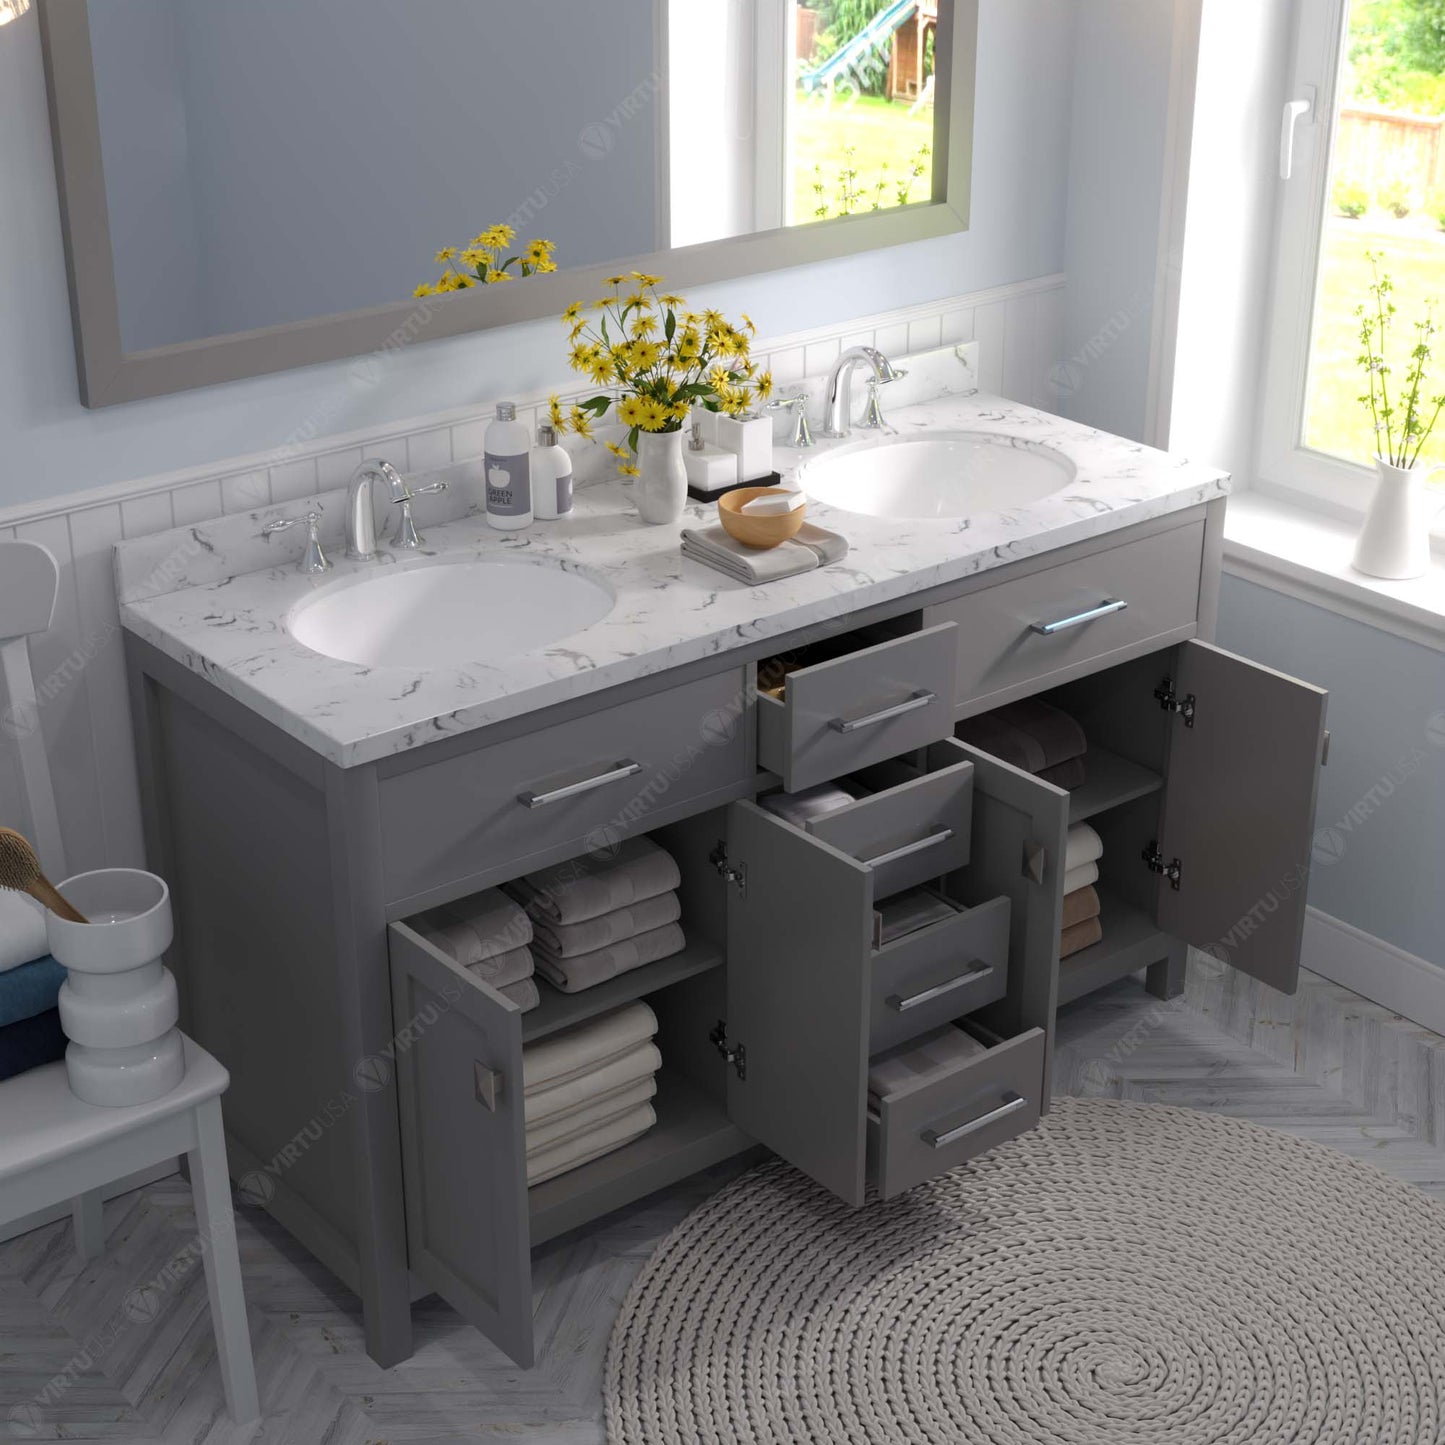 Virtu USA Caroline 60" Double Bath Vanity in Cashmere Gray with White Quartz Top and Round Sinks with Brushed Nickel Faucets with Matching Mirror - Luxe Bathroom Vanities